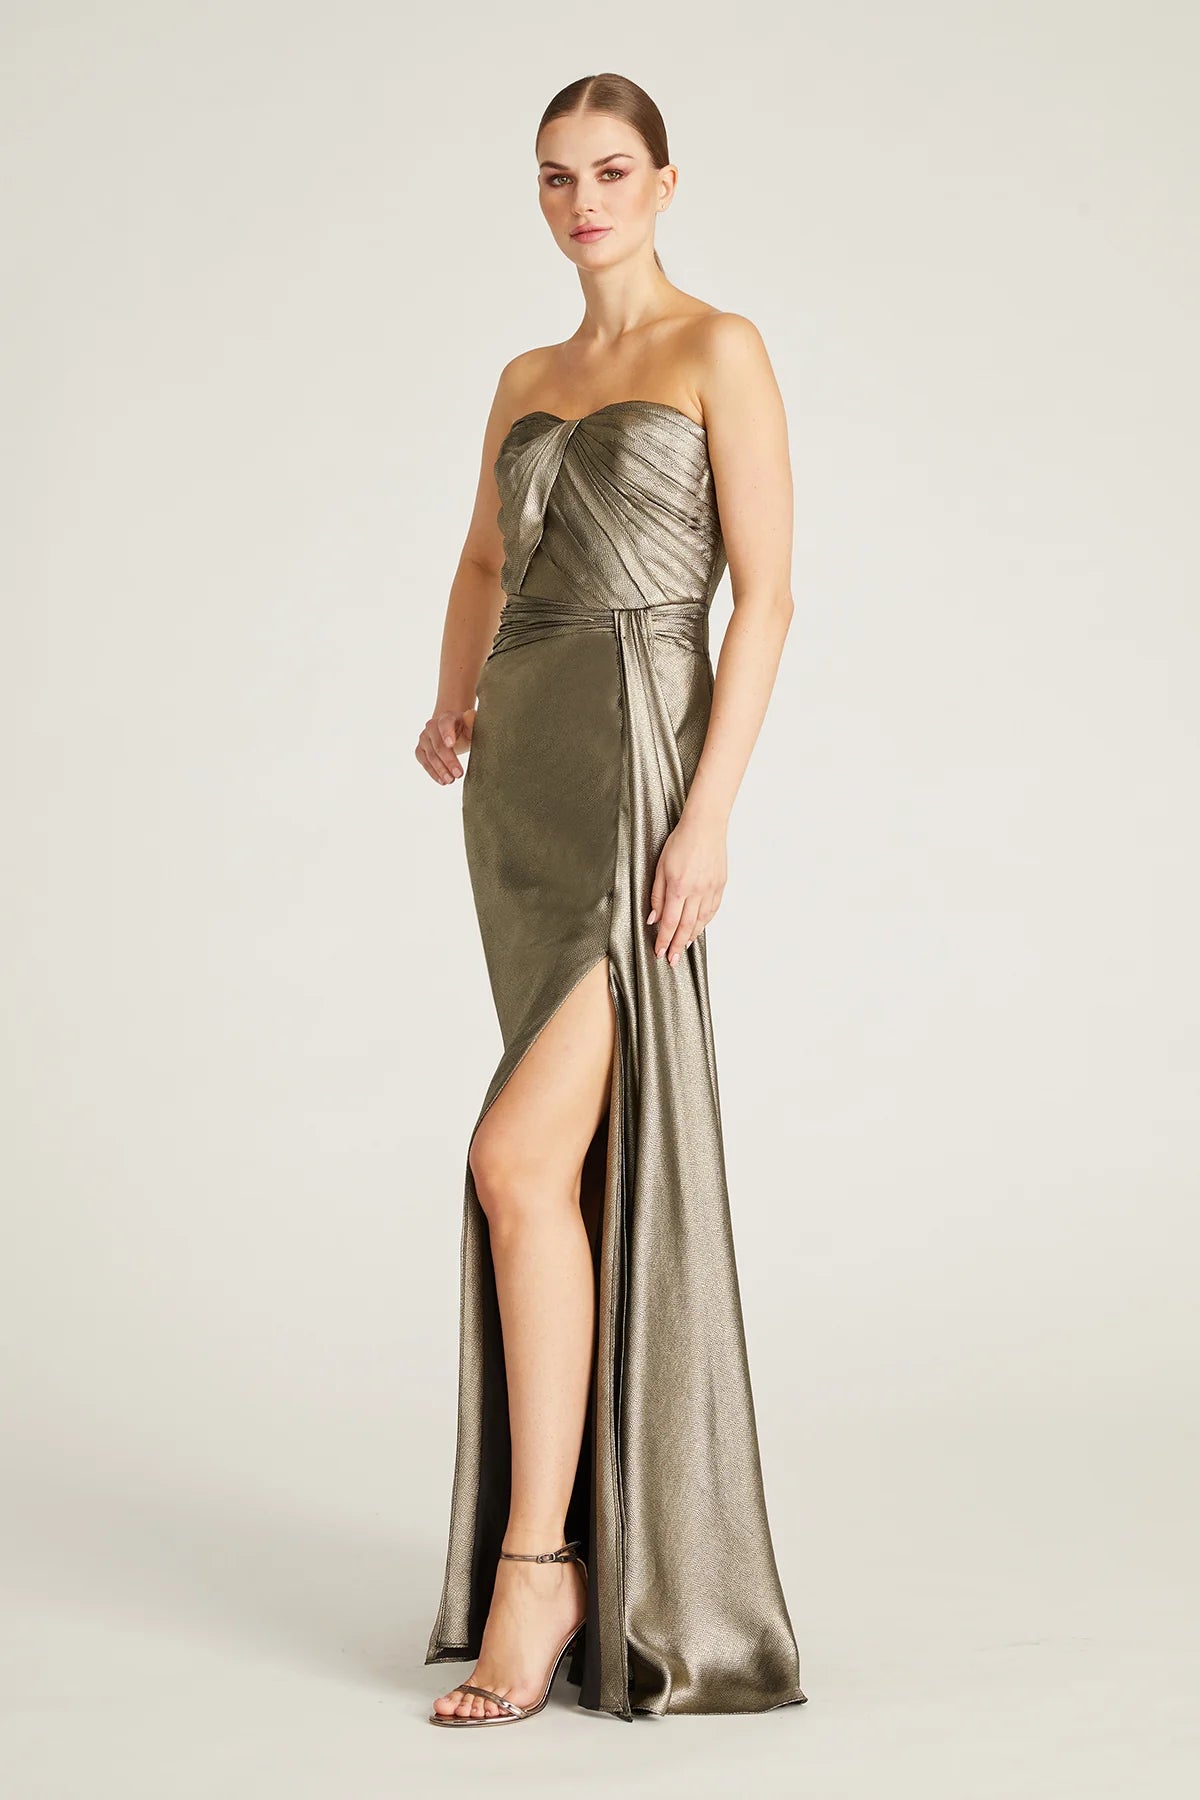 Discover sophistication with Theia's strapless satin gown featuring a sweetheart neckline and elegant column silhouette. Ideal for special evenings and mother-of-the-bride/groom occasions. Available at Madeline's Boutique in Toronto and Boca Raton, Florida.